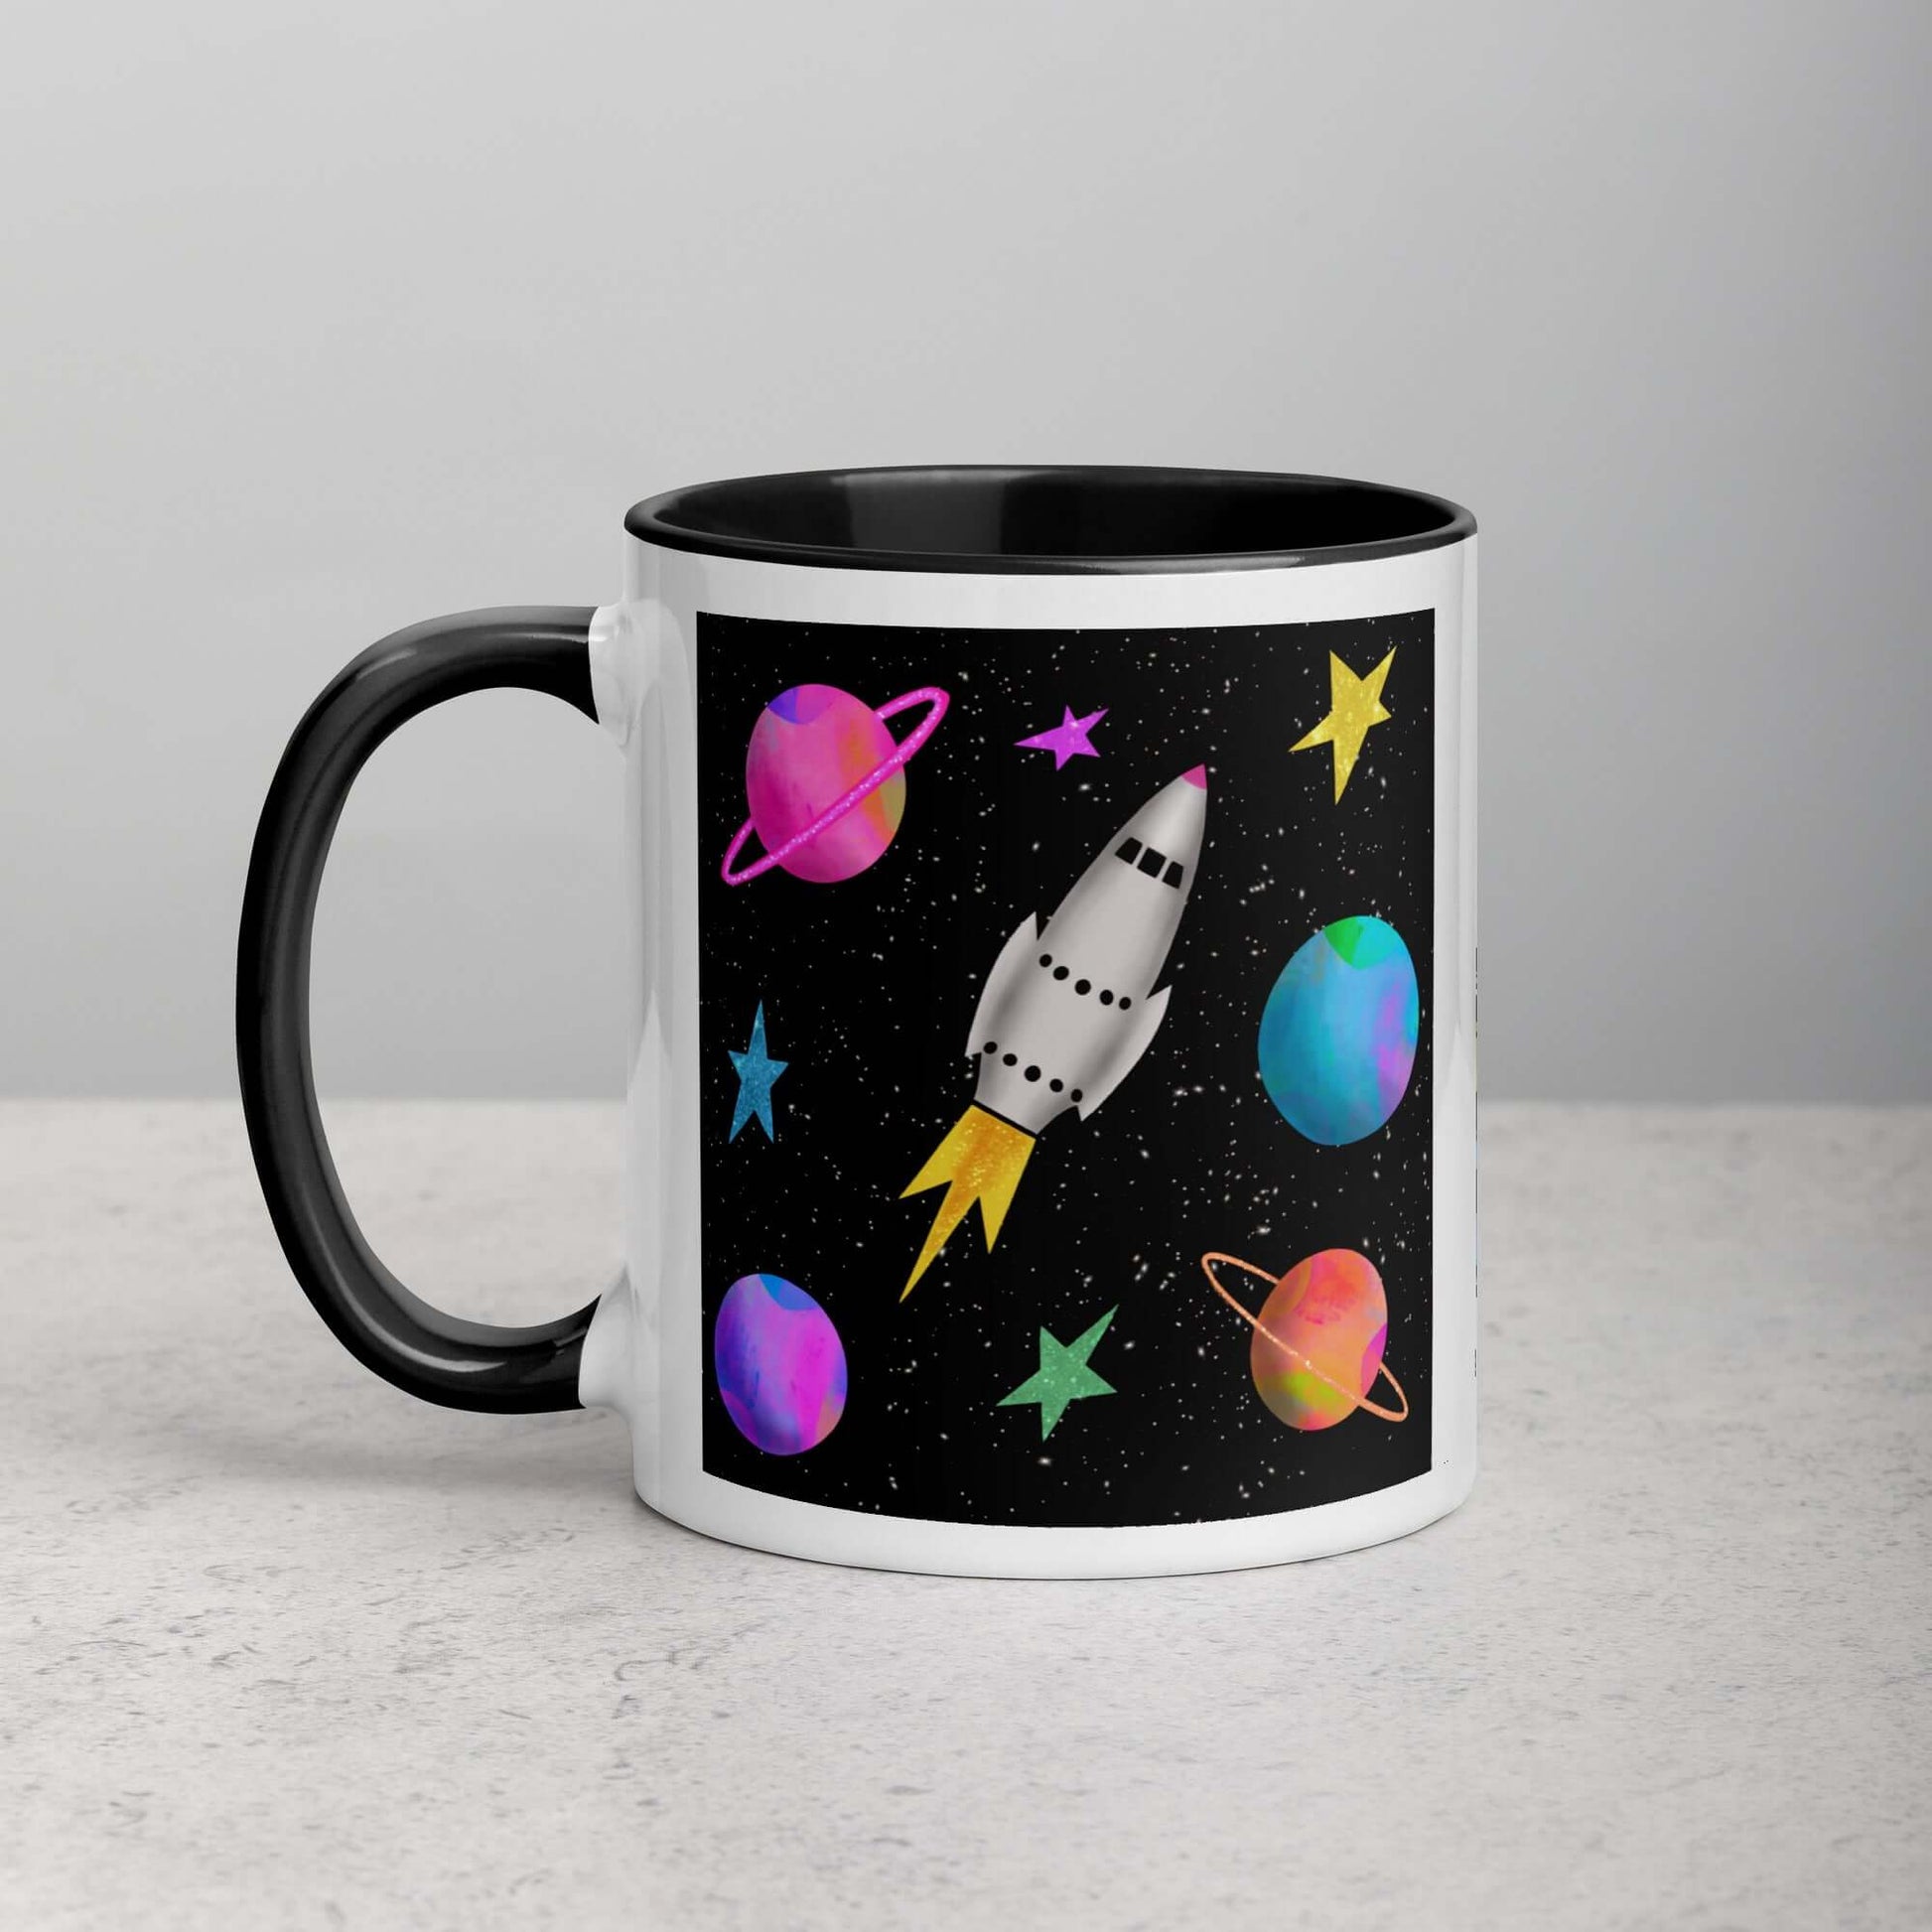 Whimsical Space Rocket with Colorful Planets and Stars on Black Background “Space Rockets” Mug with Black Color Inside Left Handed Front View